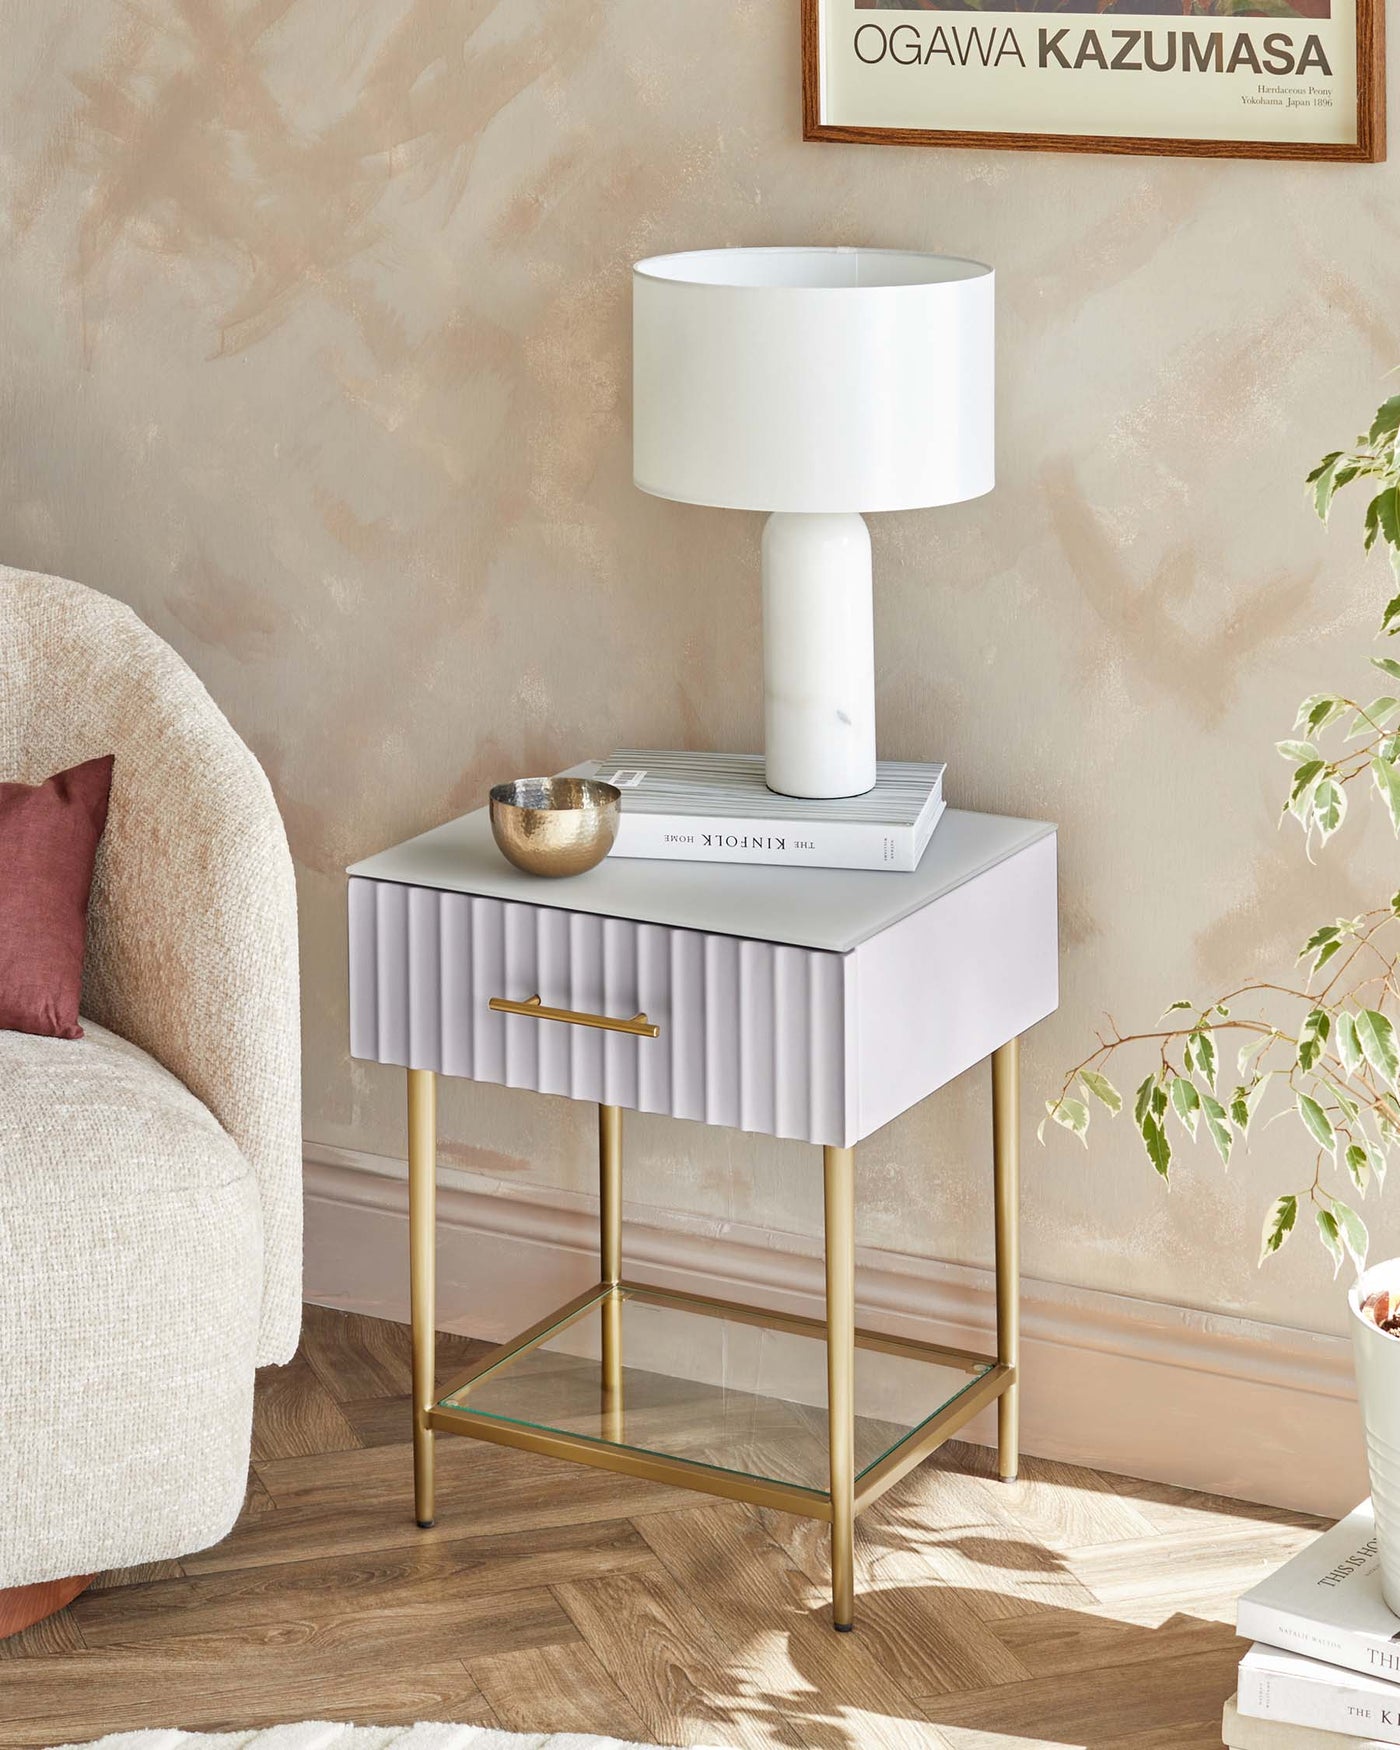 Elegant contemporary side table with a textured, pleated white drawer front, complemented by a sleek brass handle and slender brass legs featuring a lower glass shelf. A chic white lamp and decorative accessories rest atop, enhancing the modern aesthetic.